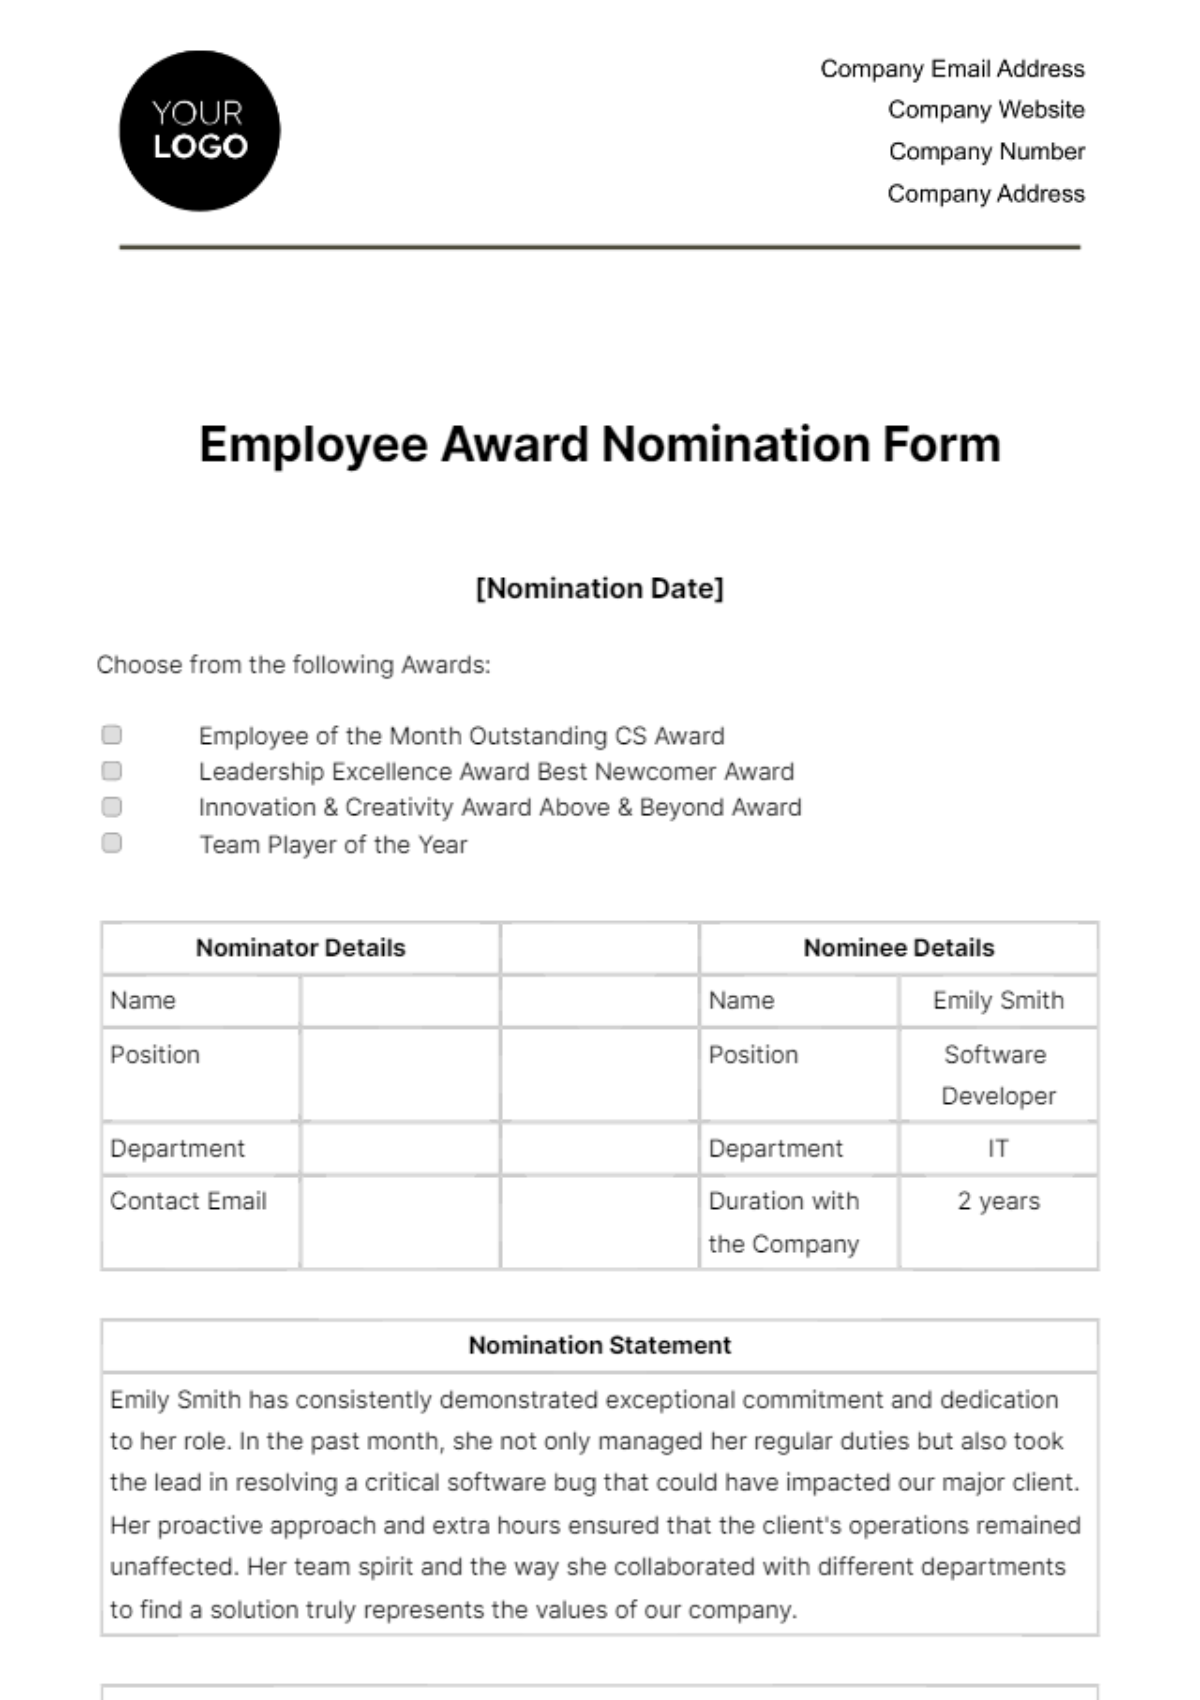 Employee Award Nomination Form HR Template